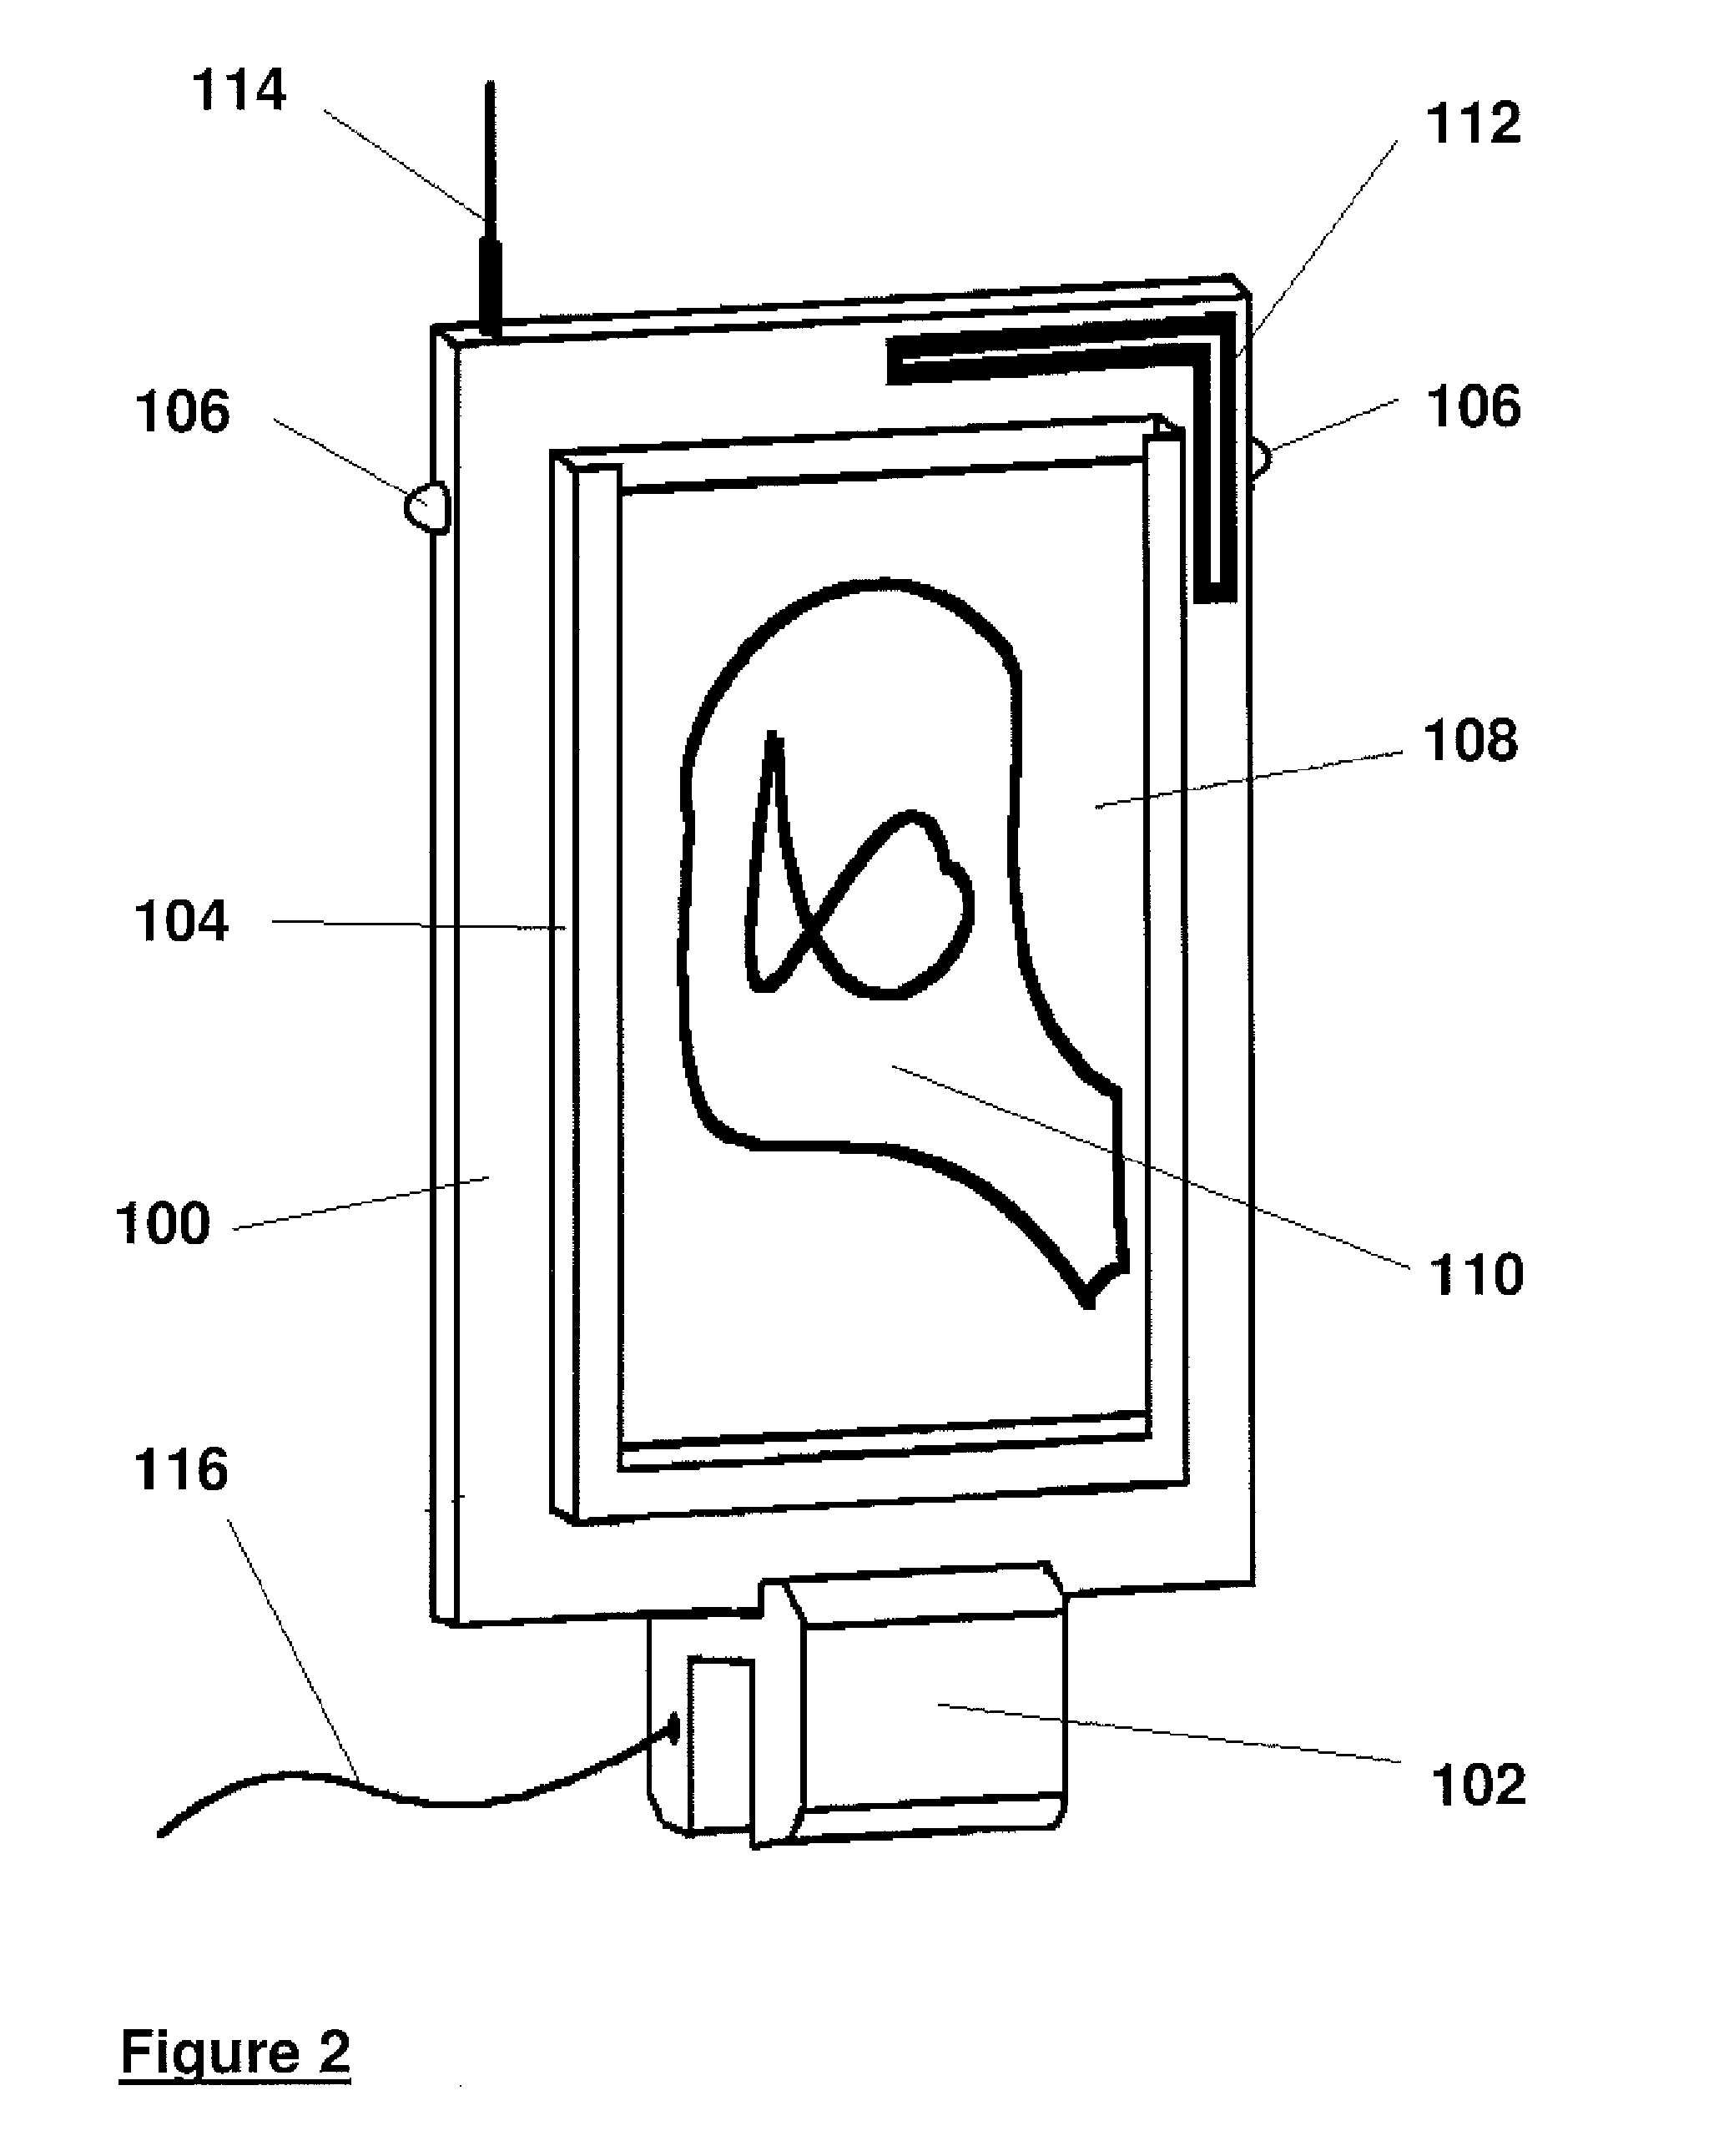 Visual elements array information display and road safety system